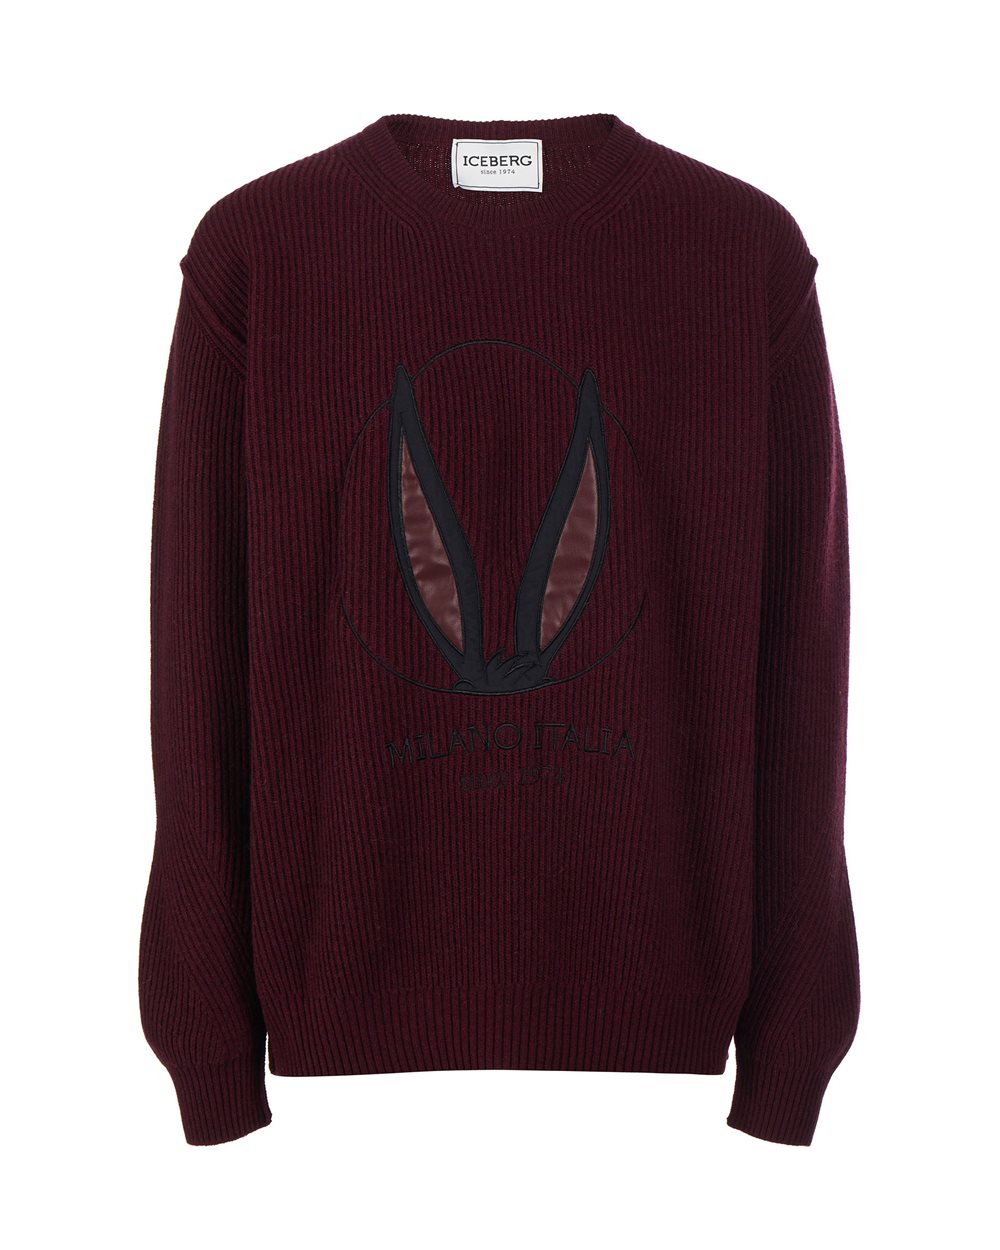 Jumper with Bugs Bunny detail - Fashion Show Man | Iceberg - Official Website